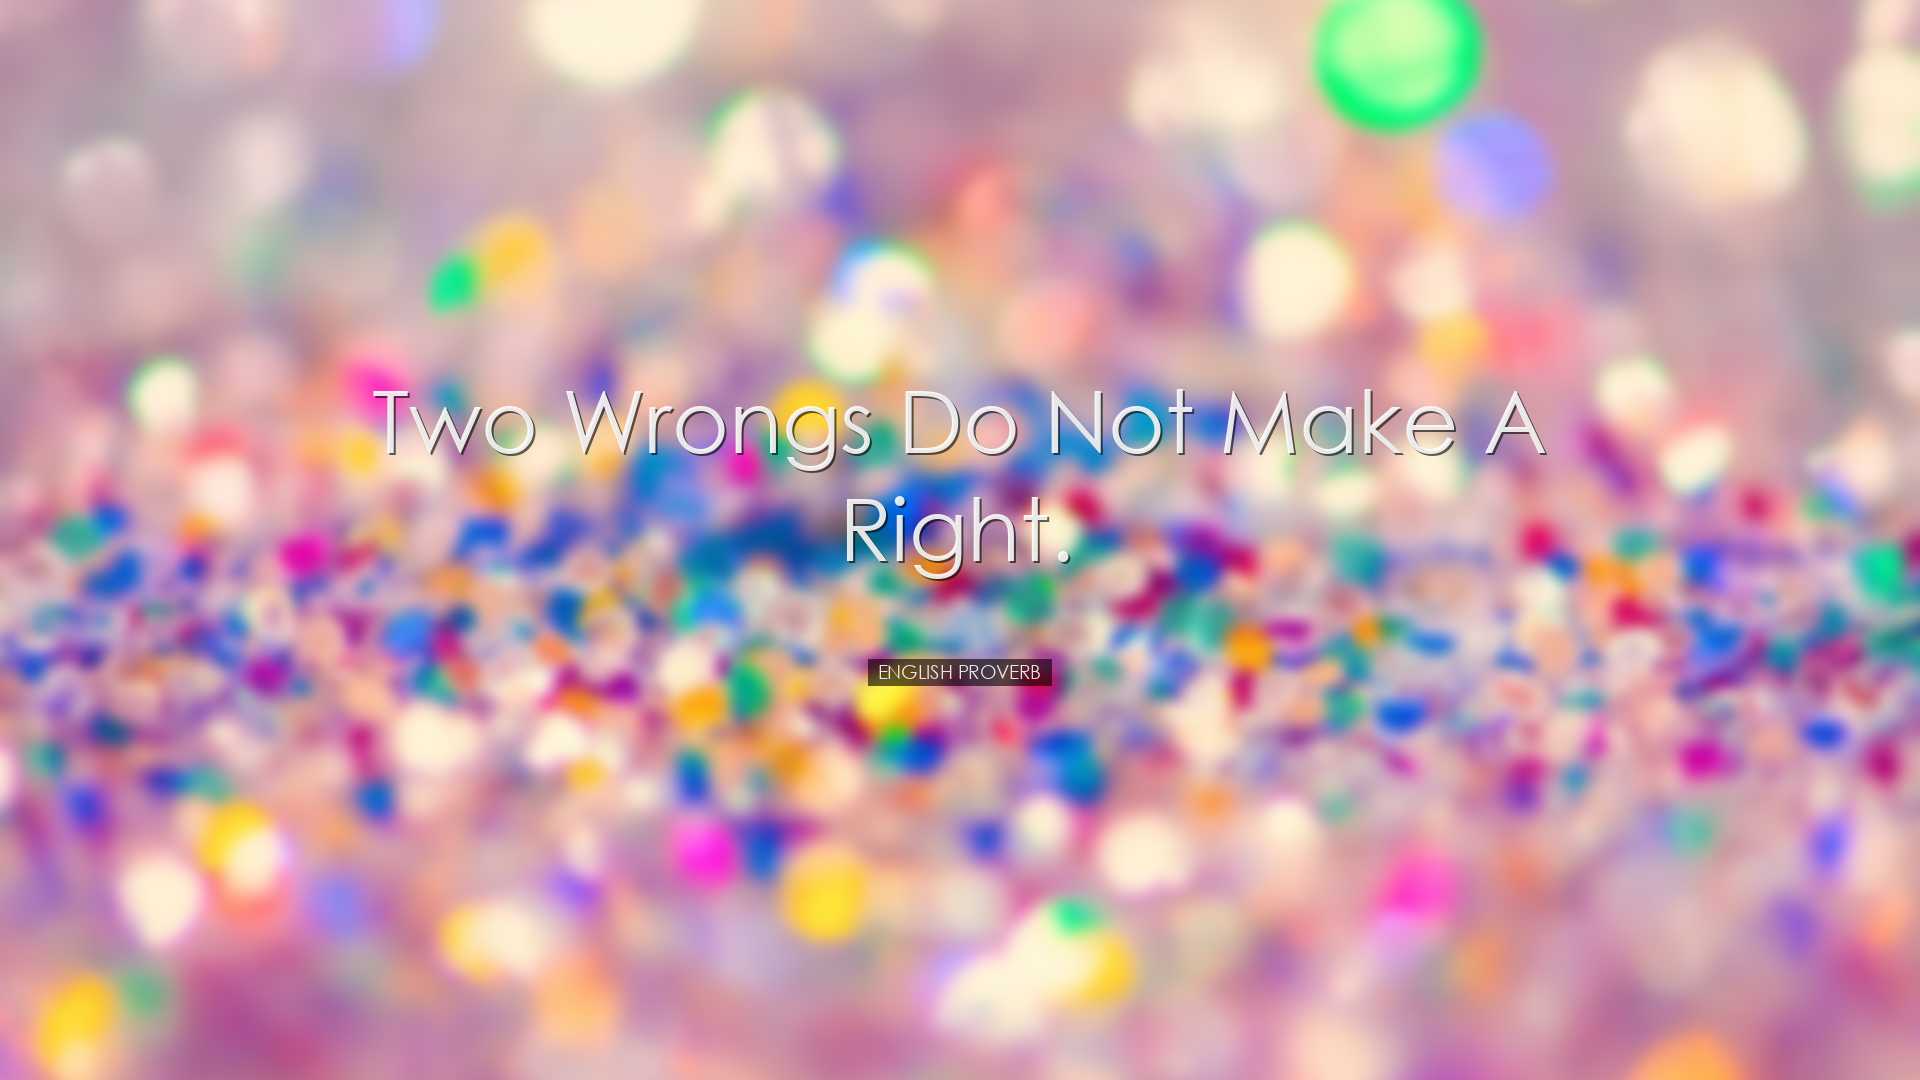 Two wrongs do not make a right. - English Proverb